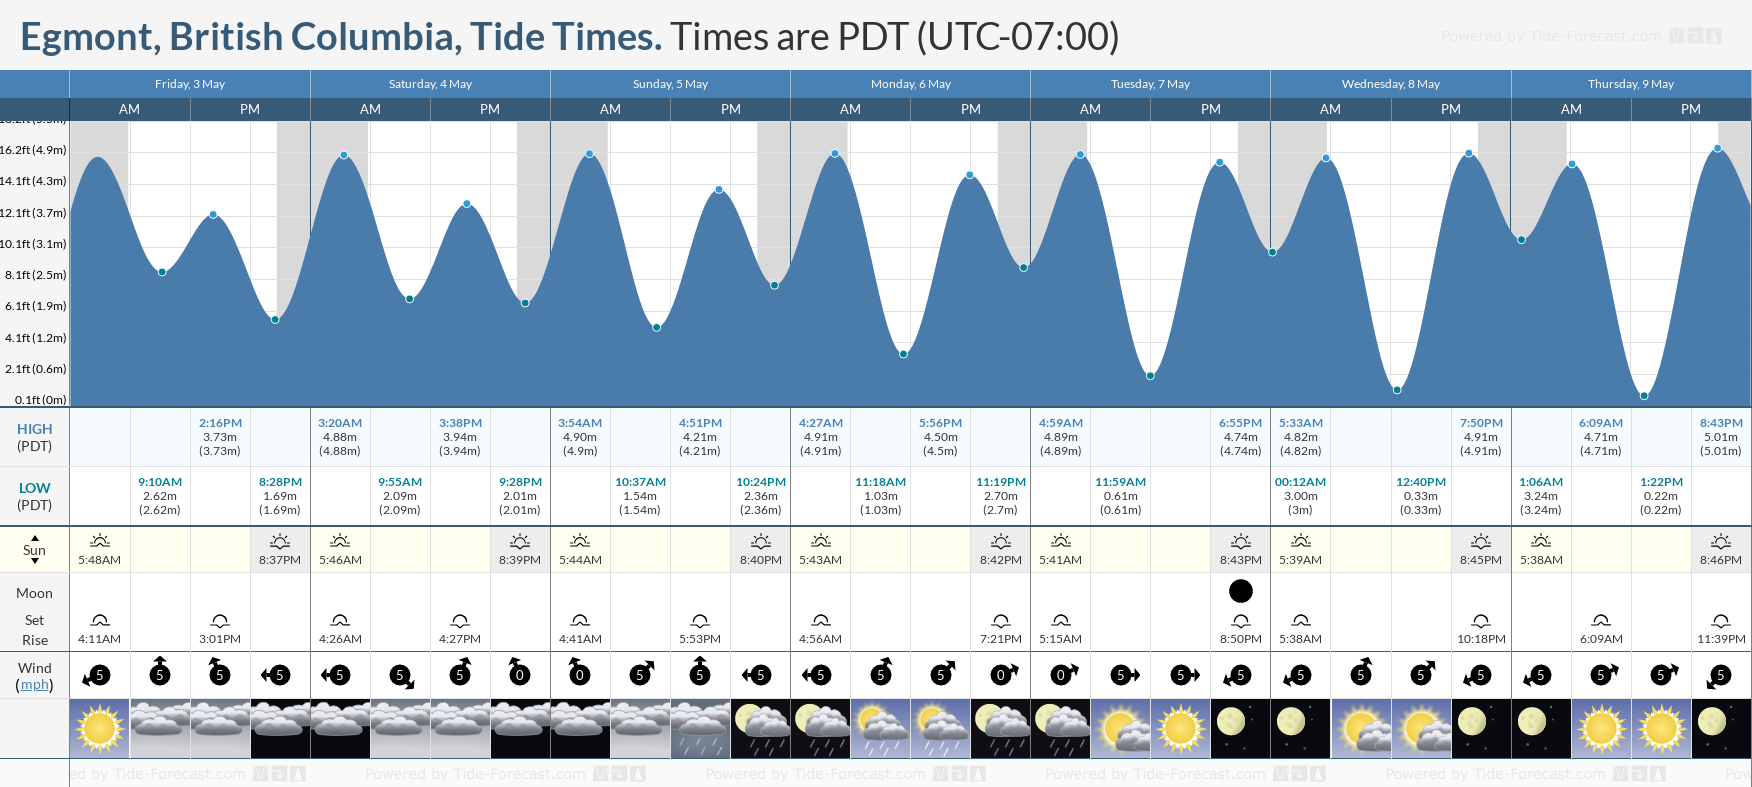 Egmont, British Columbia Tide Chart including high and low tide tide times for the next 7 days